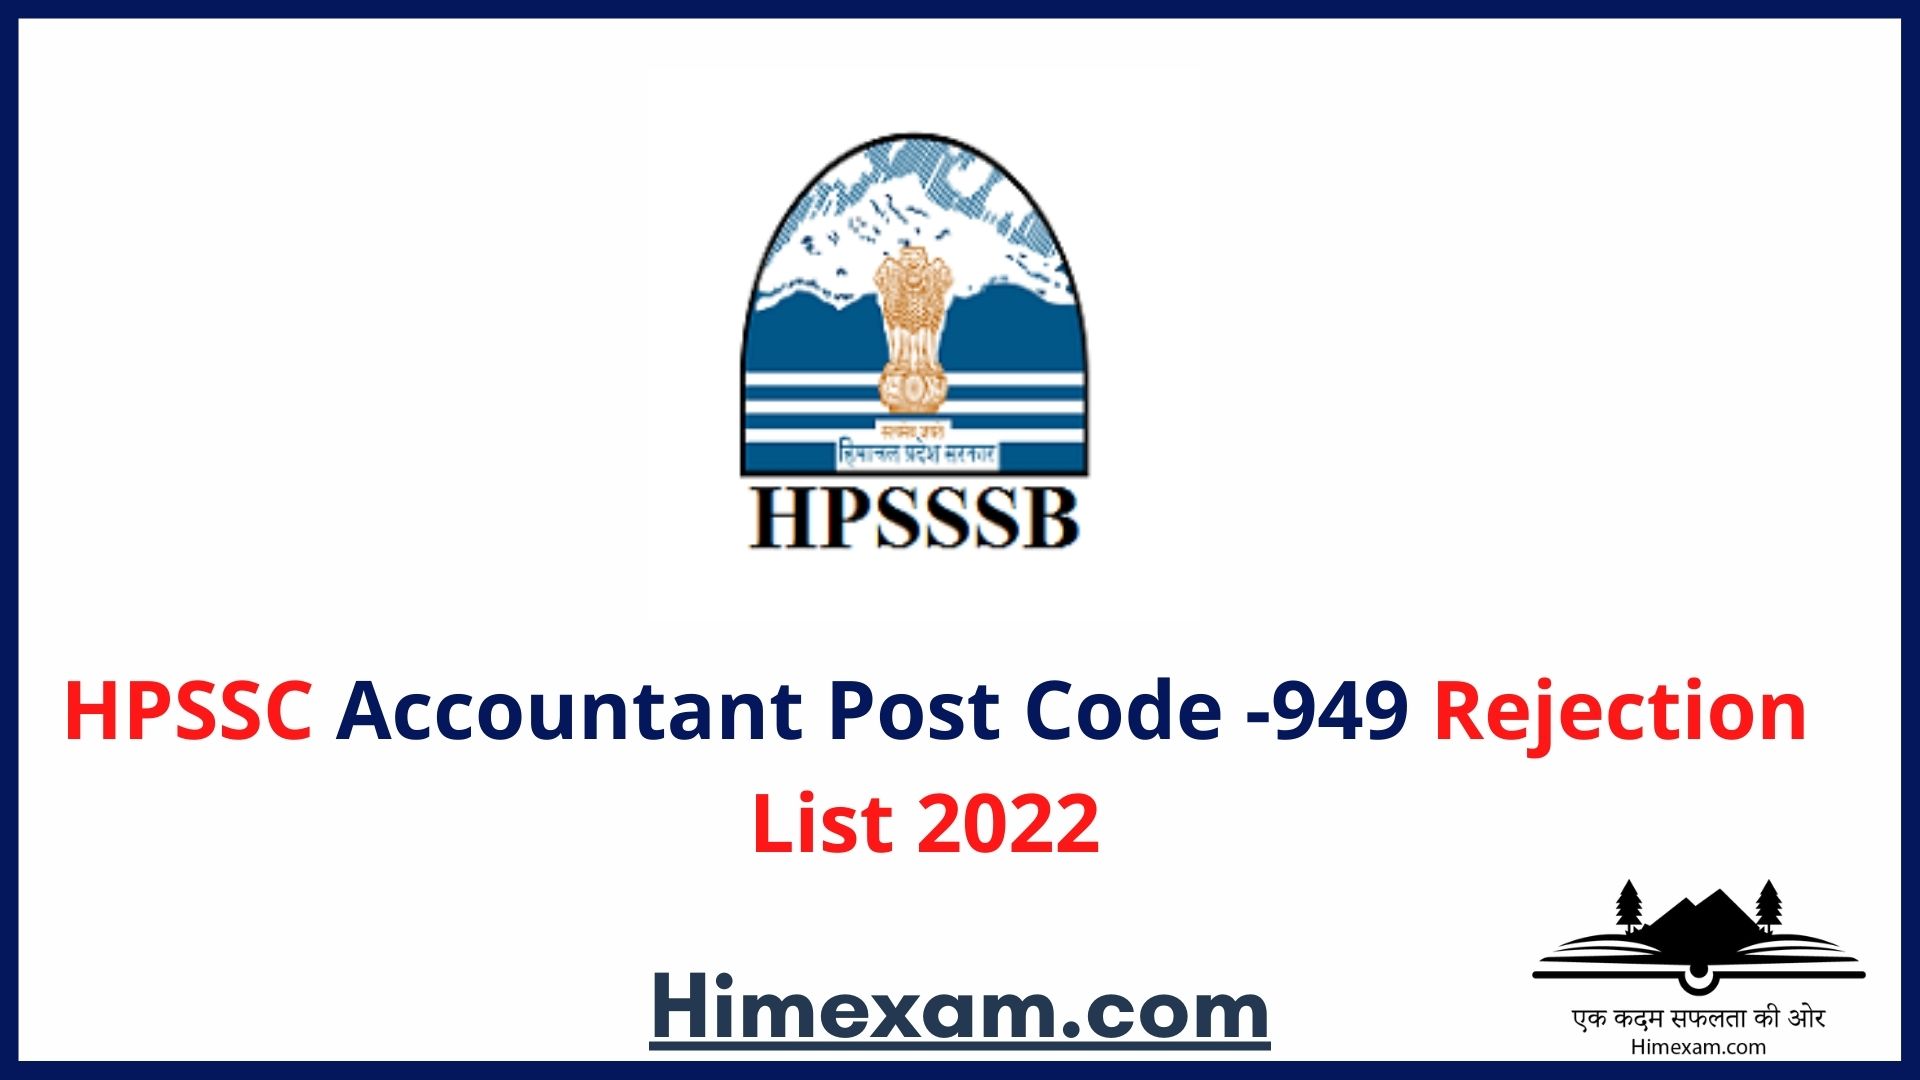 HPSSC Accountant Post Code -949 Rejection List 2022